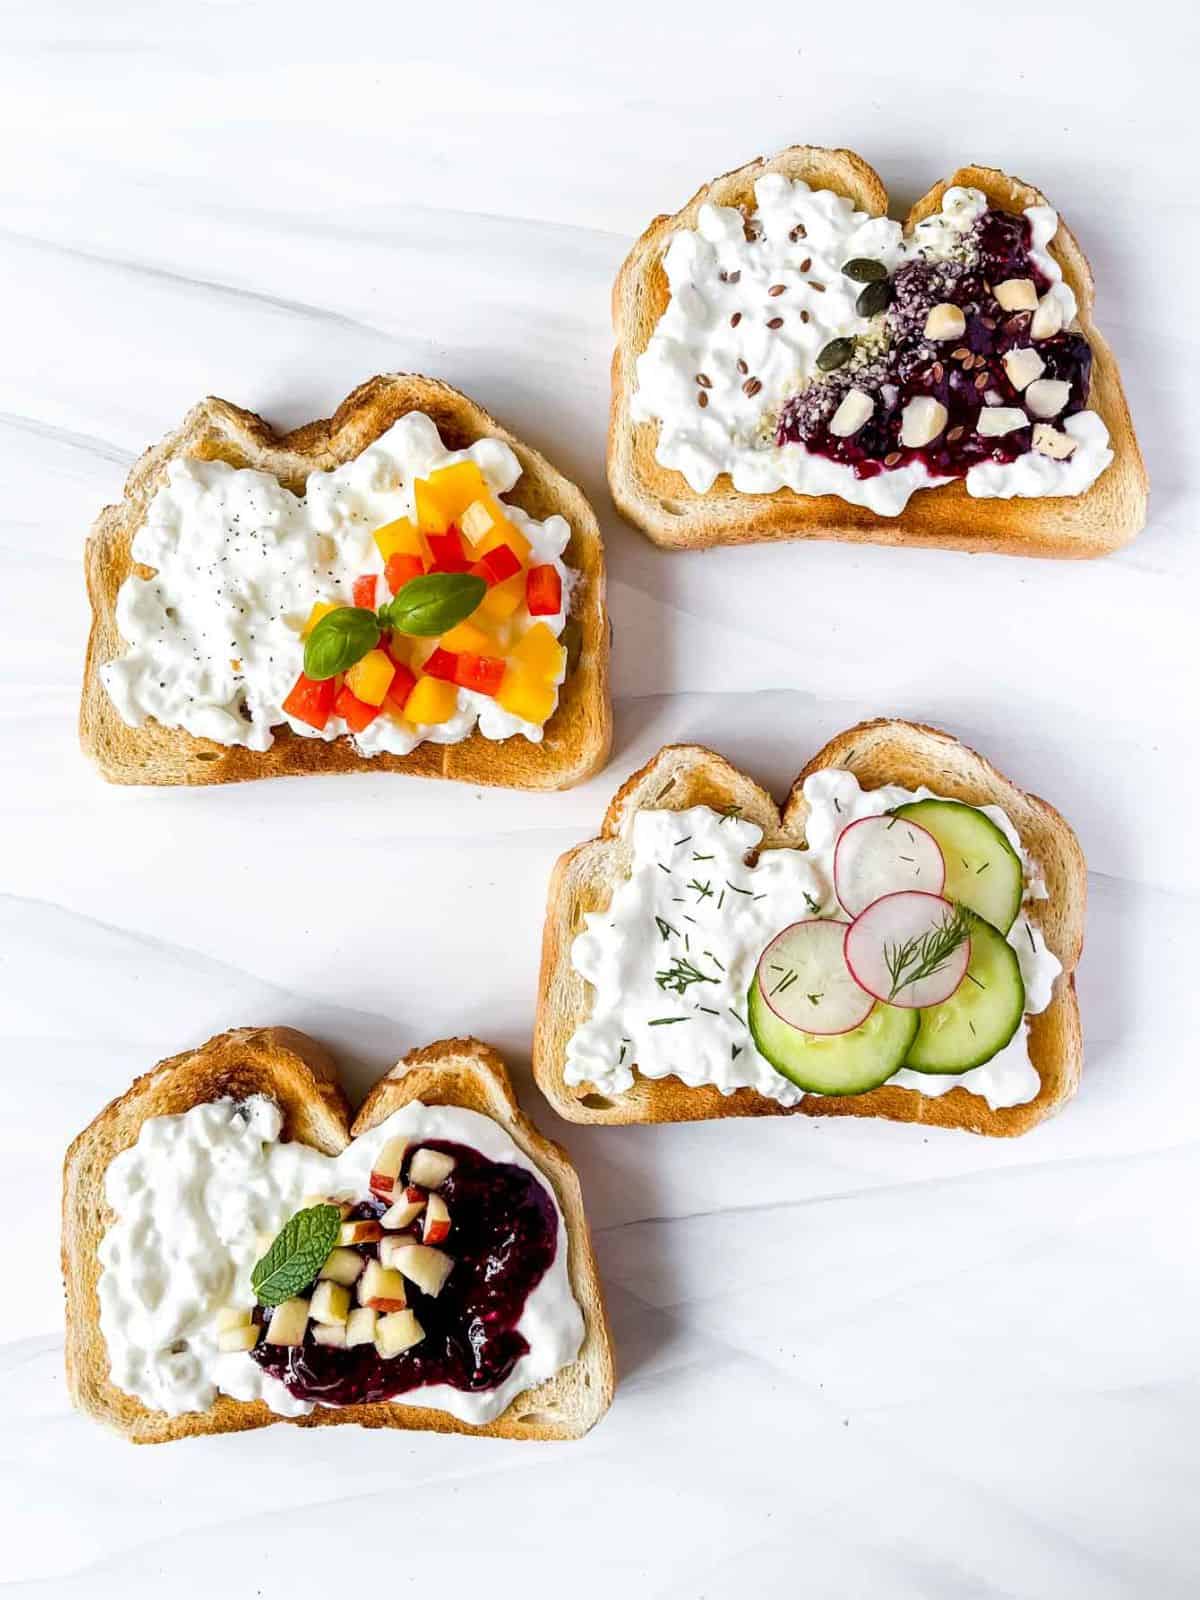 four cottage cheese toasts with a variety of toppings of jam, herbs, vegetables and nuts.